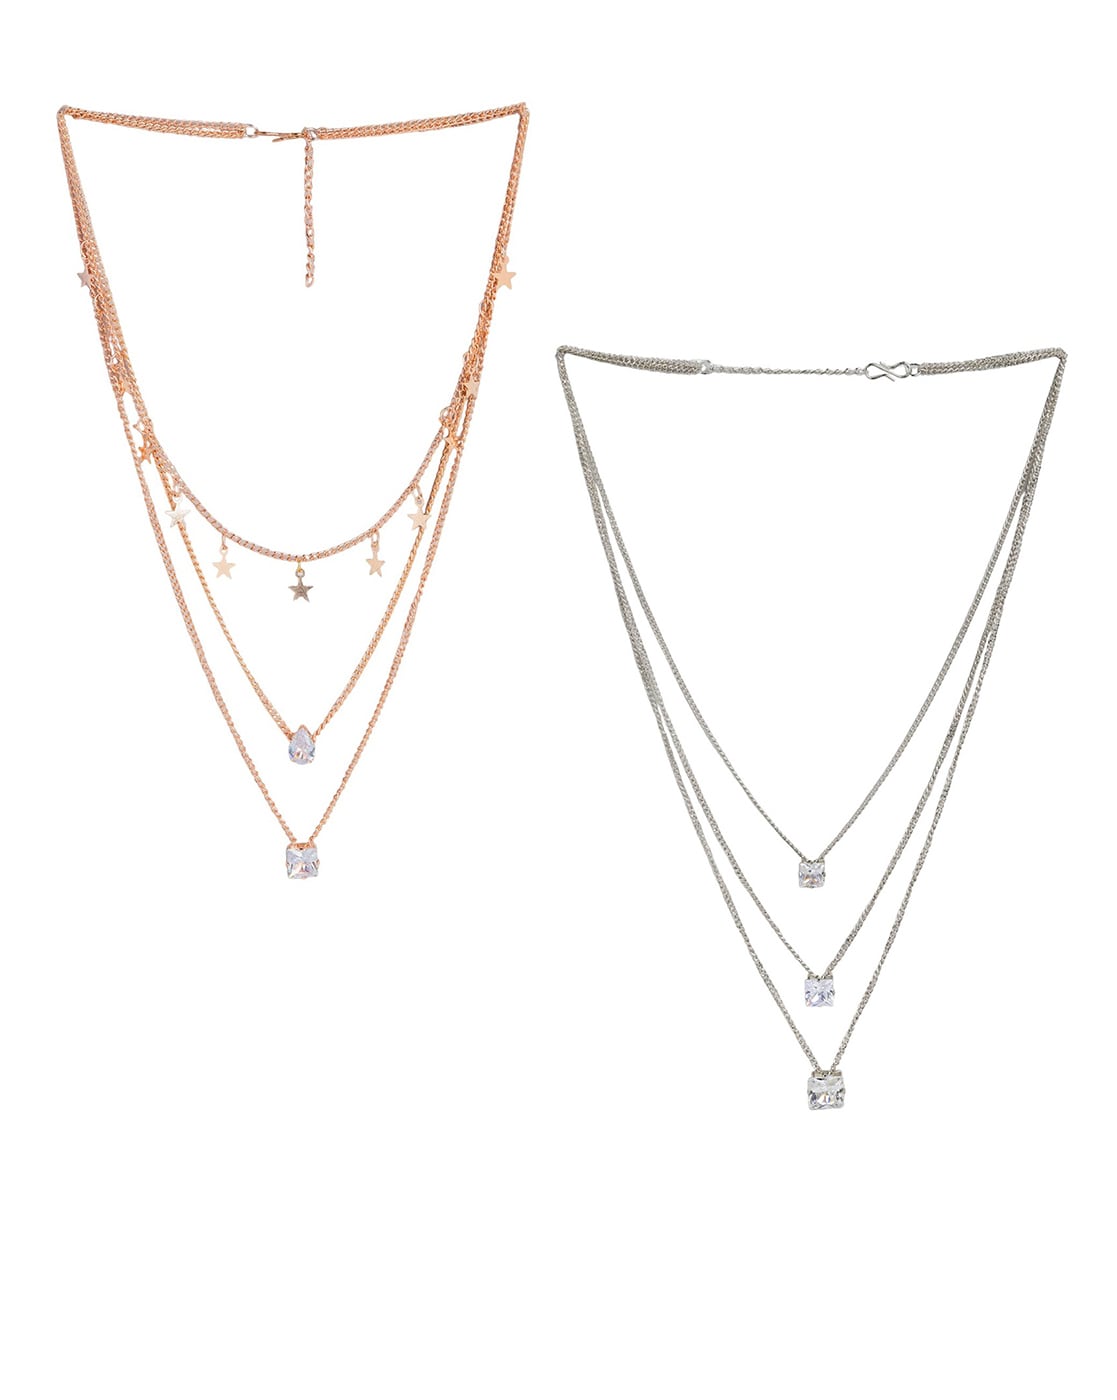 Double Layered Neckpiece – Stracts